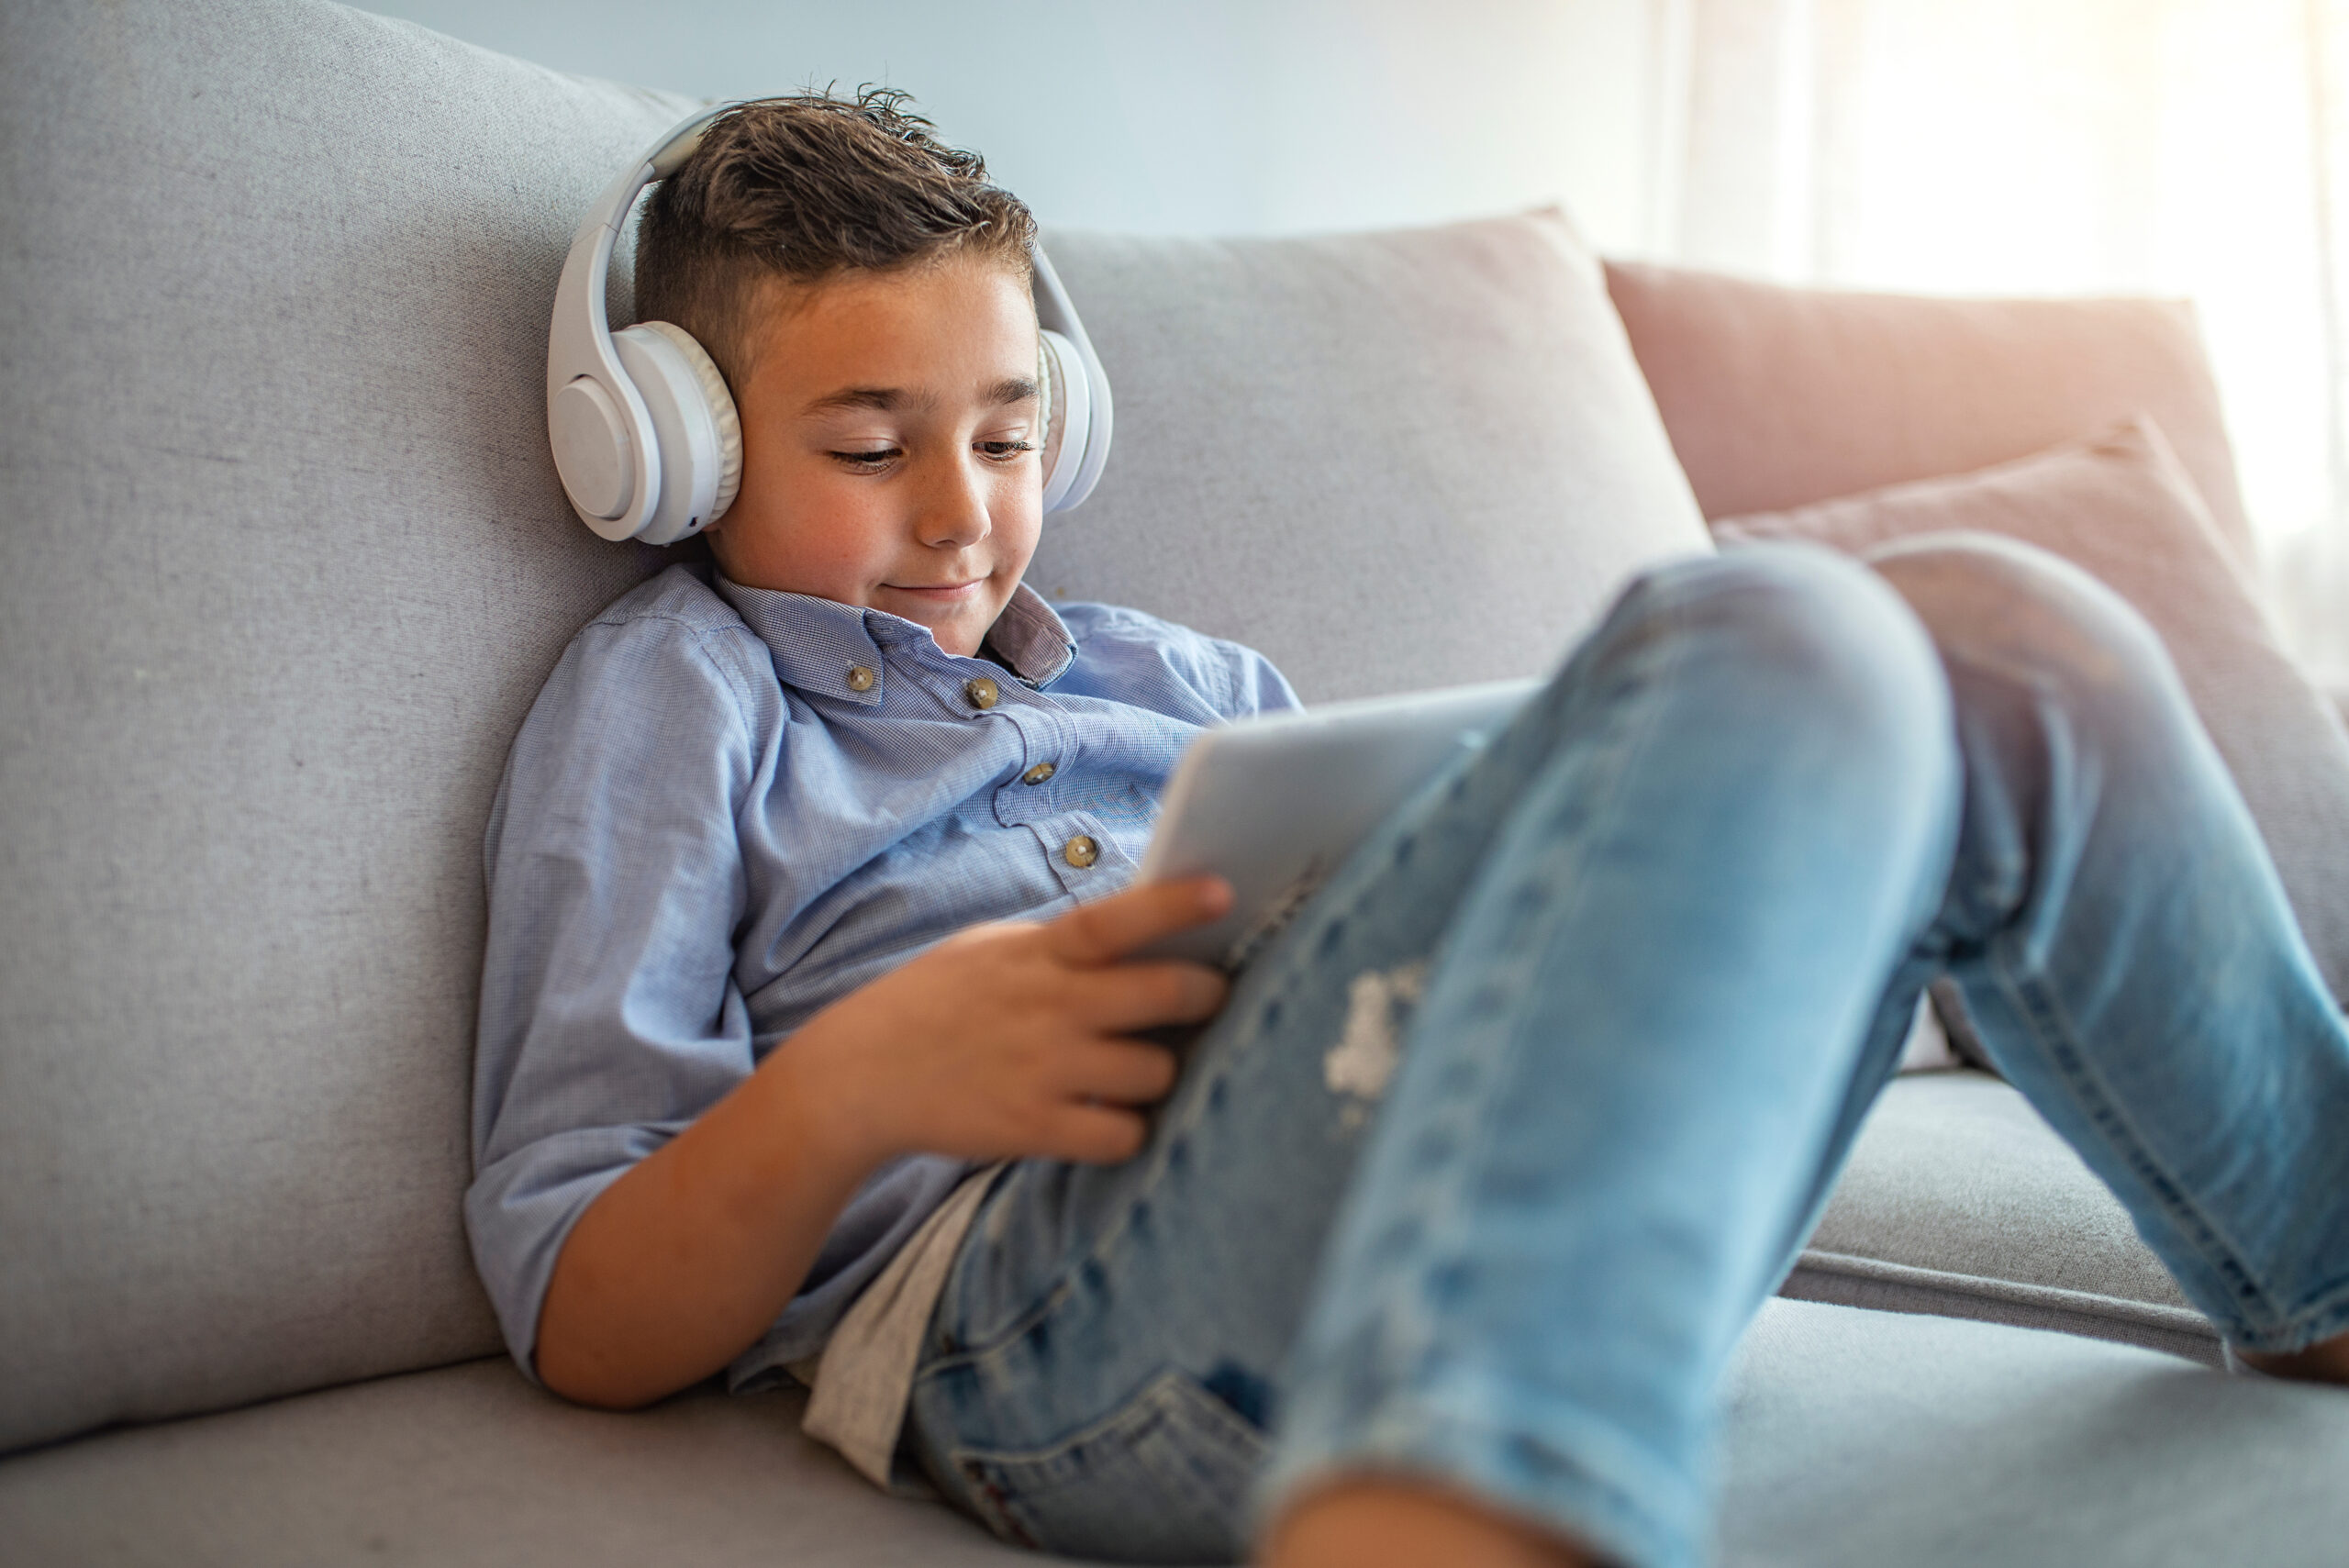 Smiling boy in big white headphones watching videos on tablet computer. Little boy in headphones is using a digital tablet and smiling. Concentrated kid playing with digital tablet